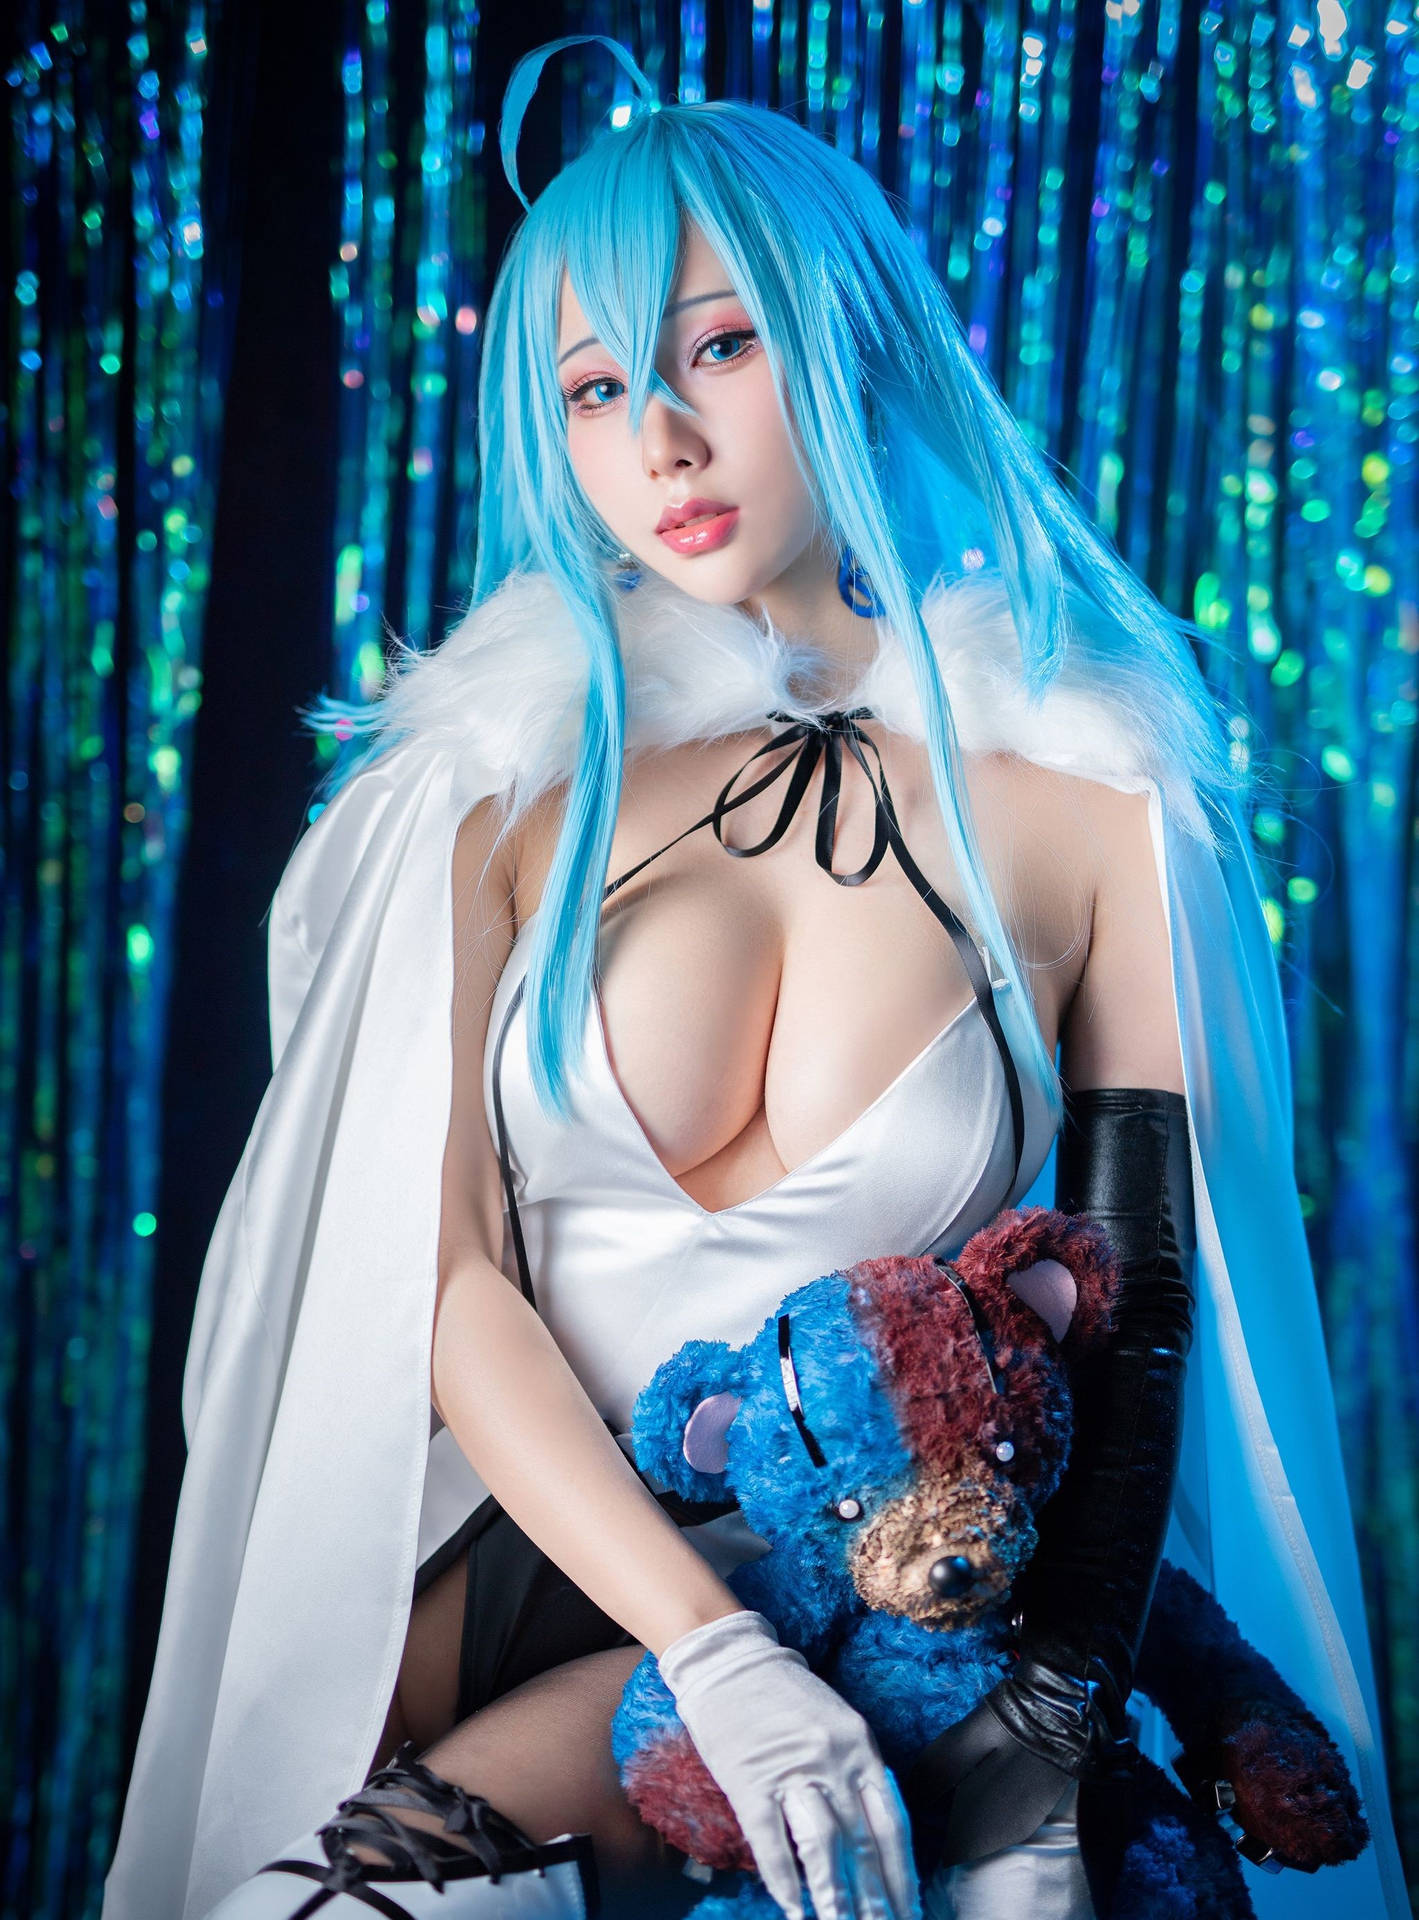 Cosplay Featuring Vivy - The Ai Idol